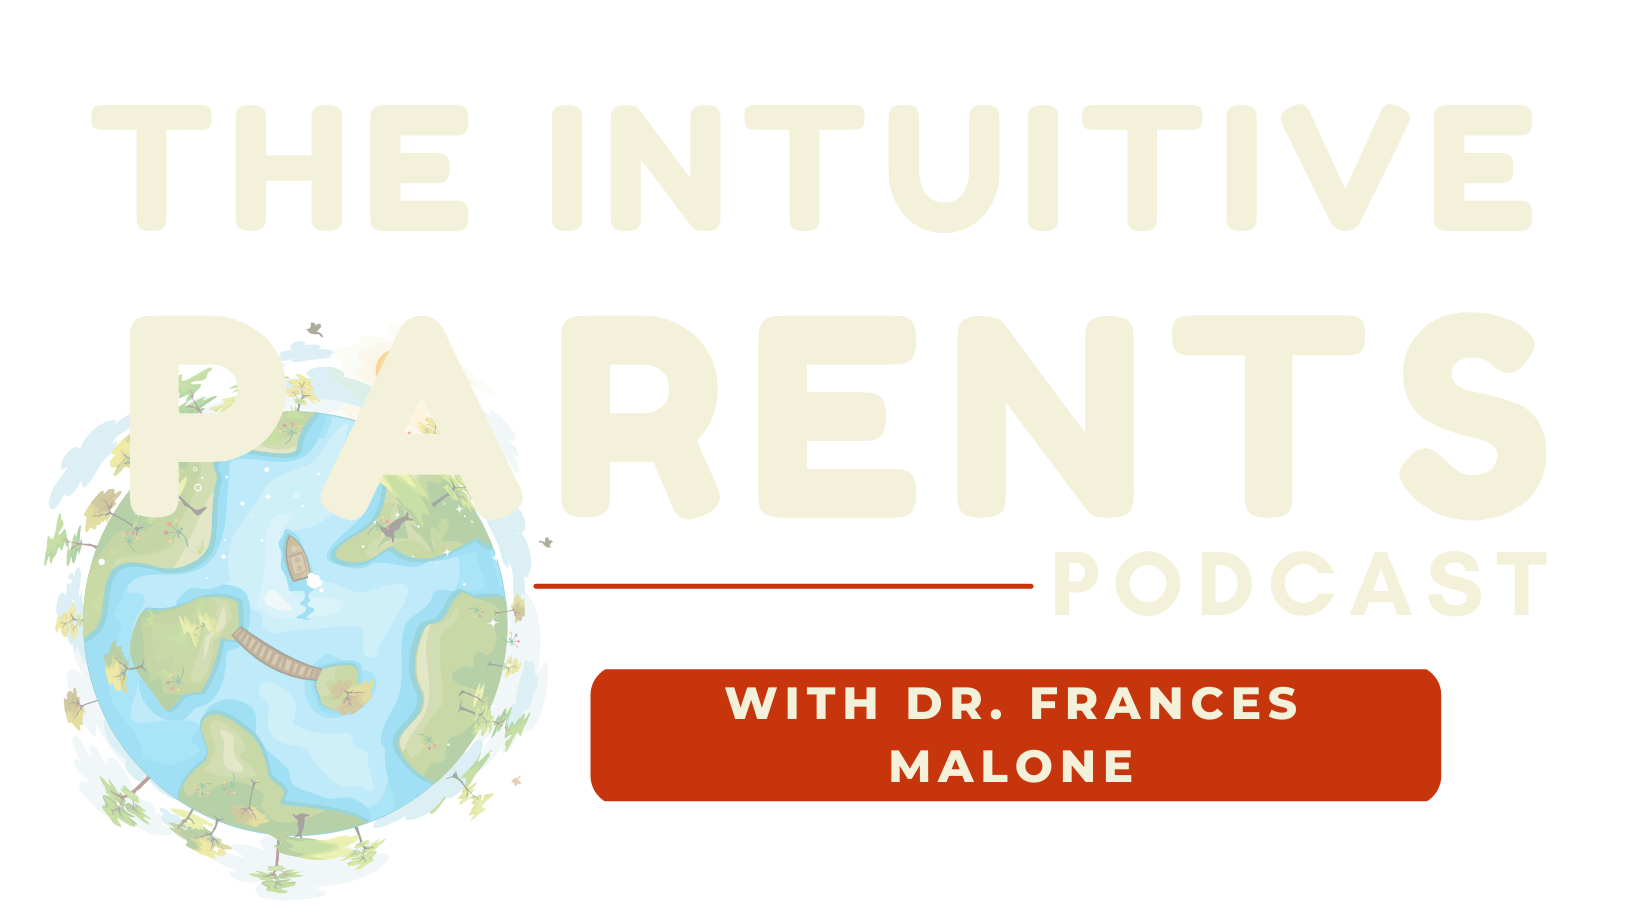 The Intuitive Parents Podcast